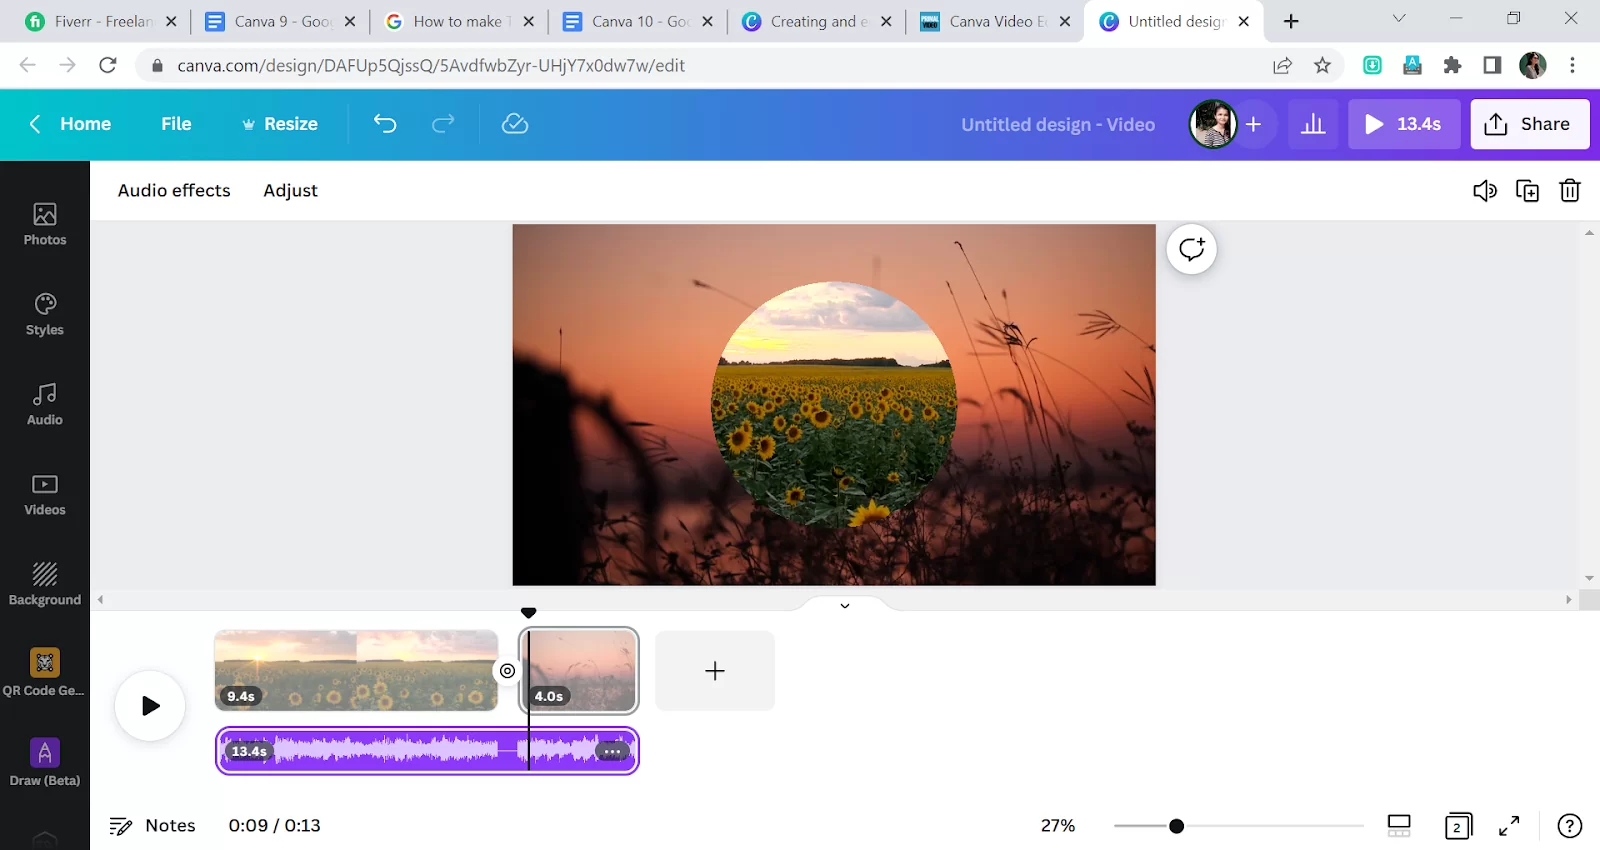 Play Video on Canva